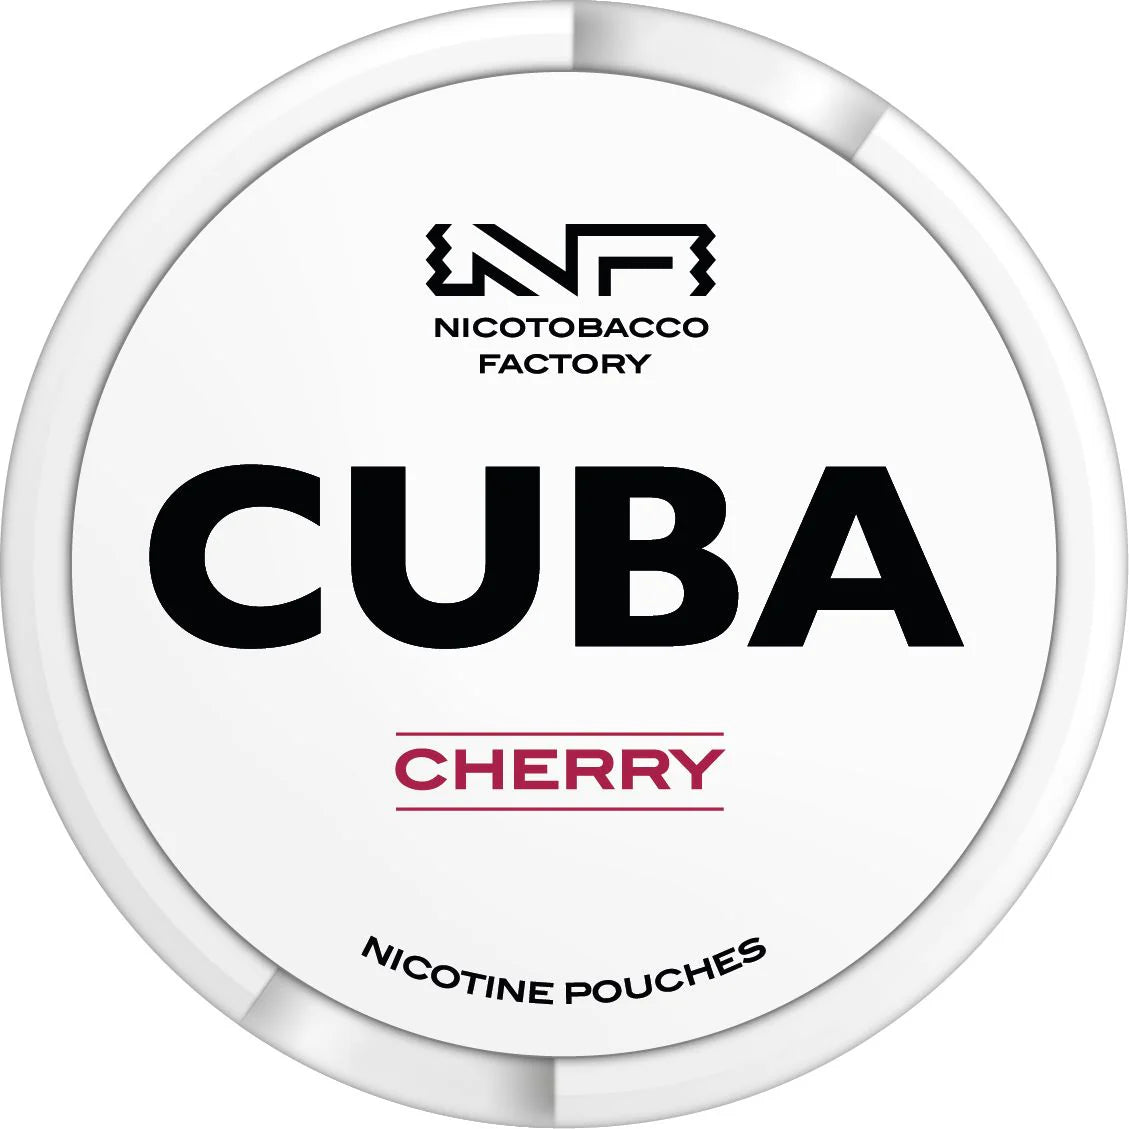 Cherry Nicotine Pouches By Cuba White